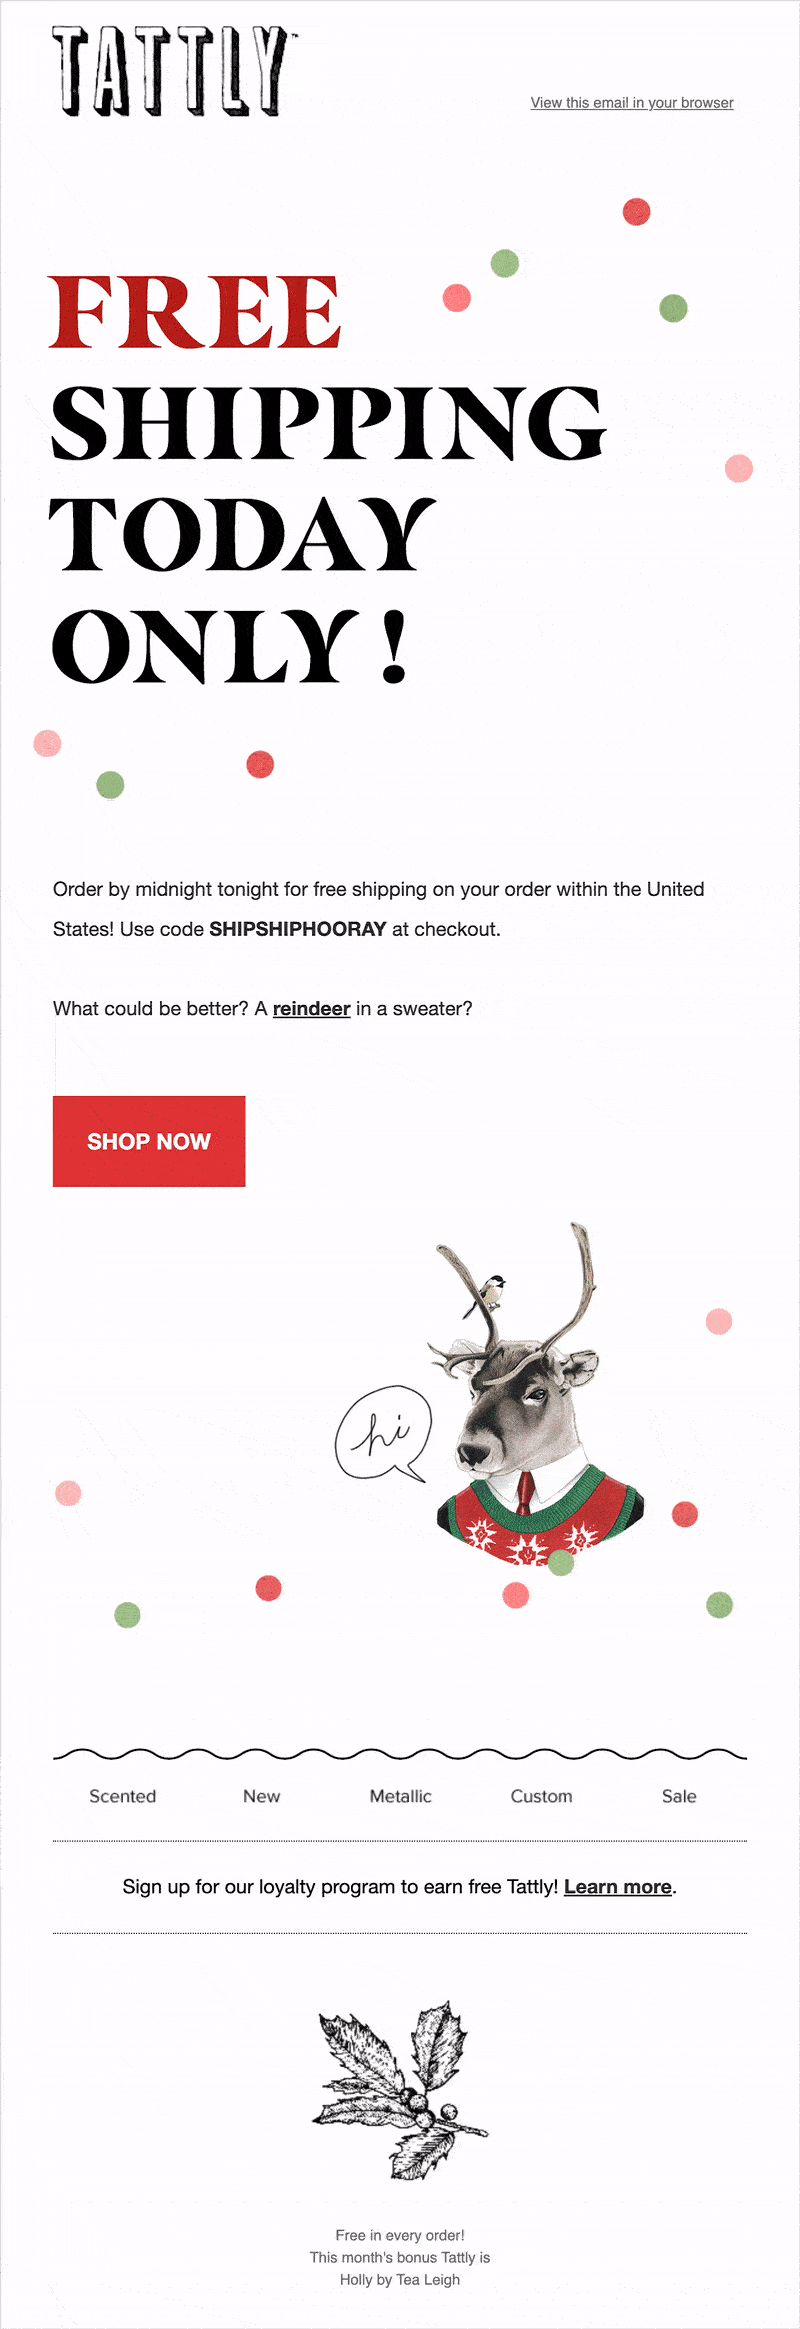 Tattly Christmas email campaign offering free shipping with flashing GIF